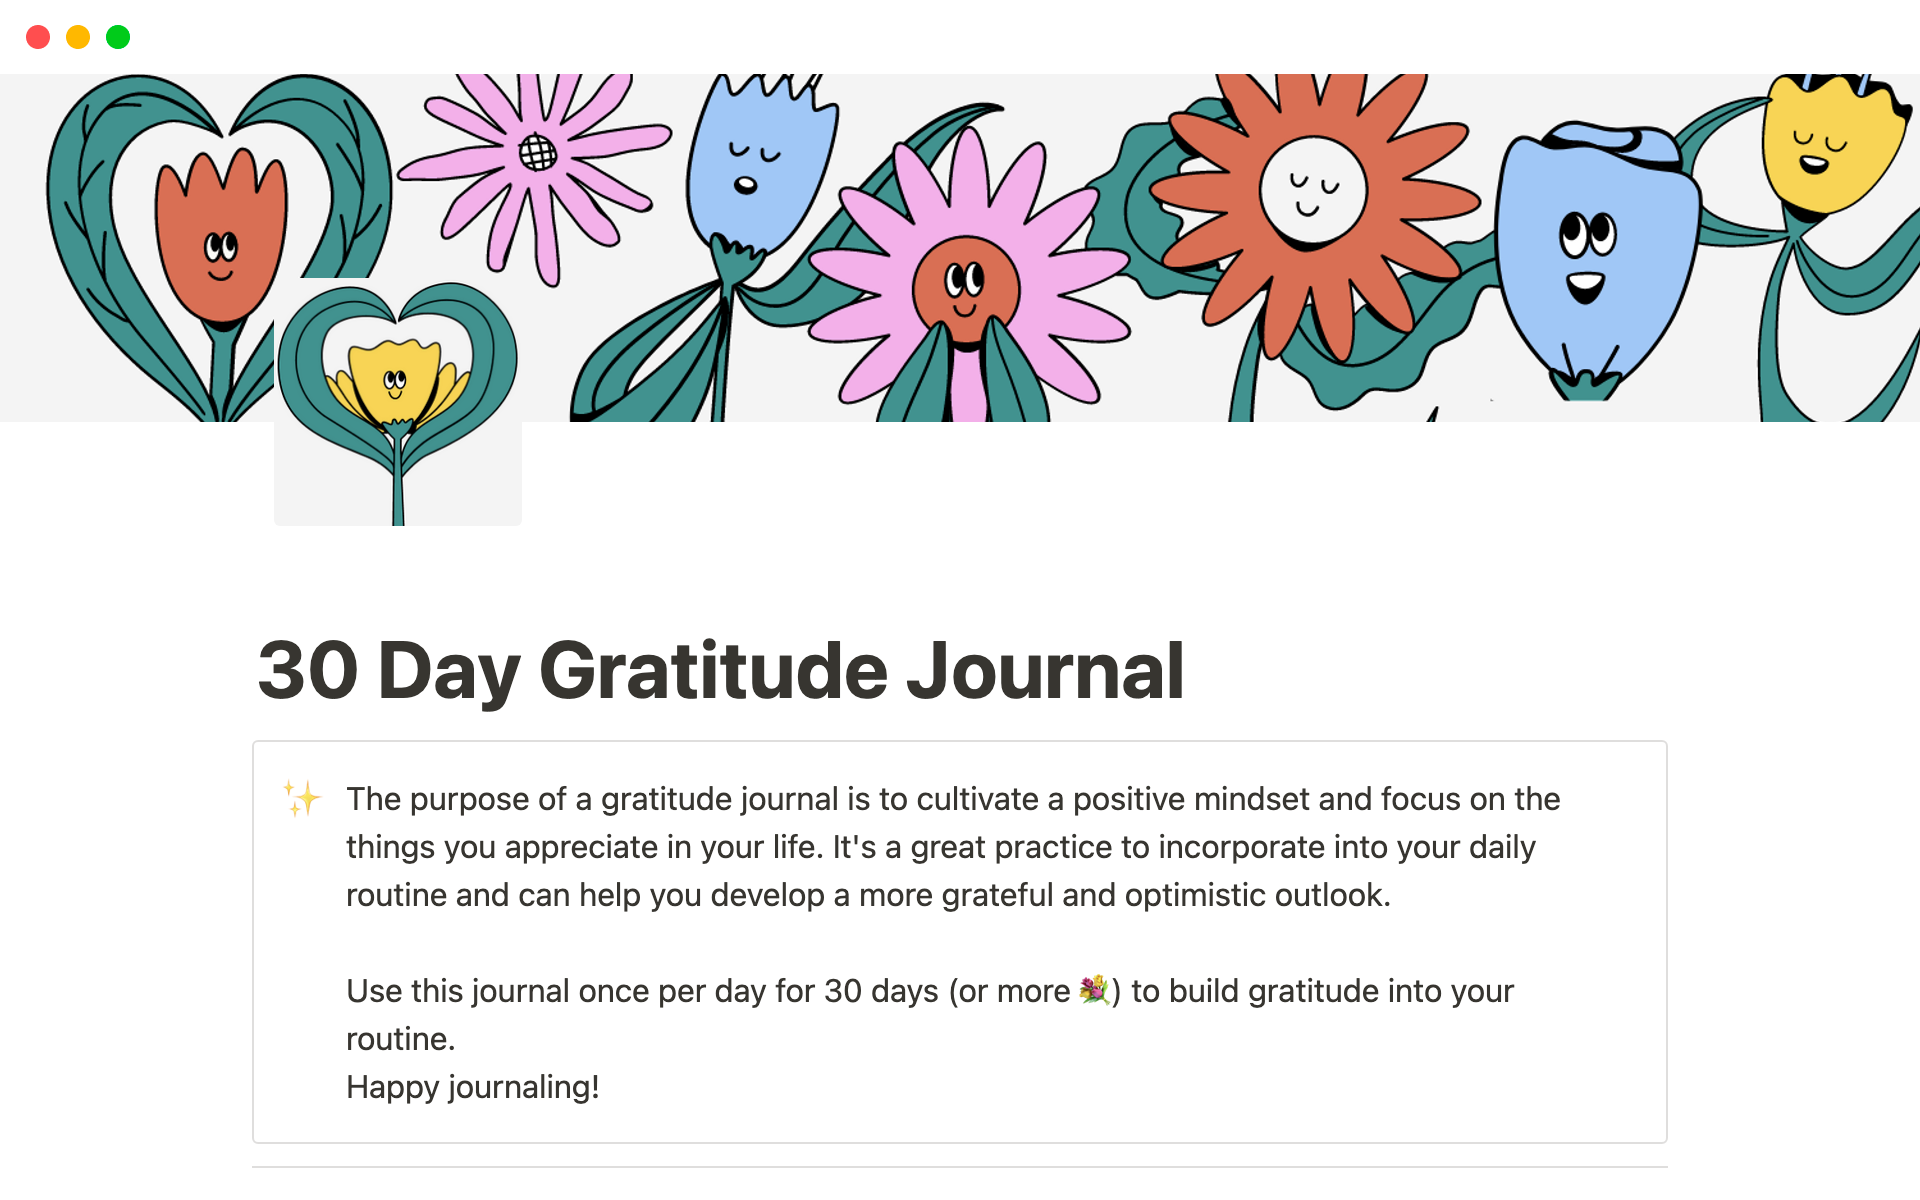 Generates daily gratitude prompts and positive affirmations